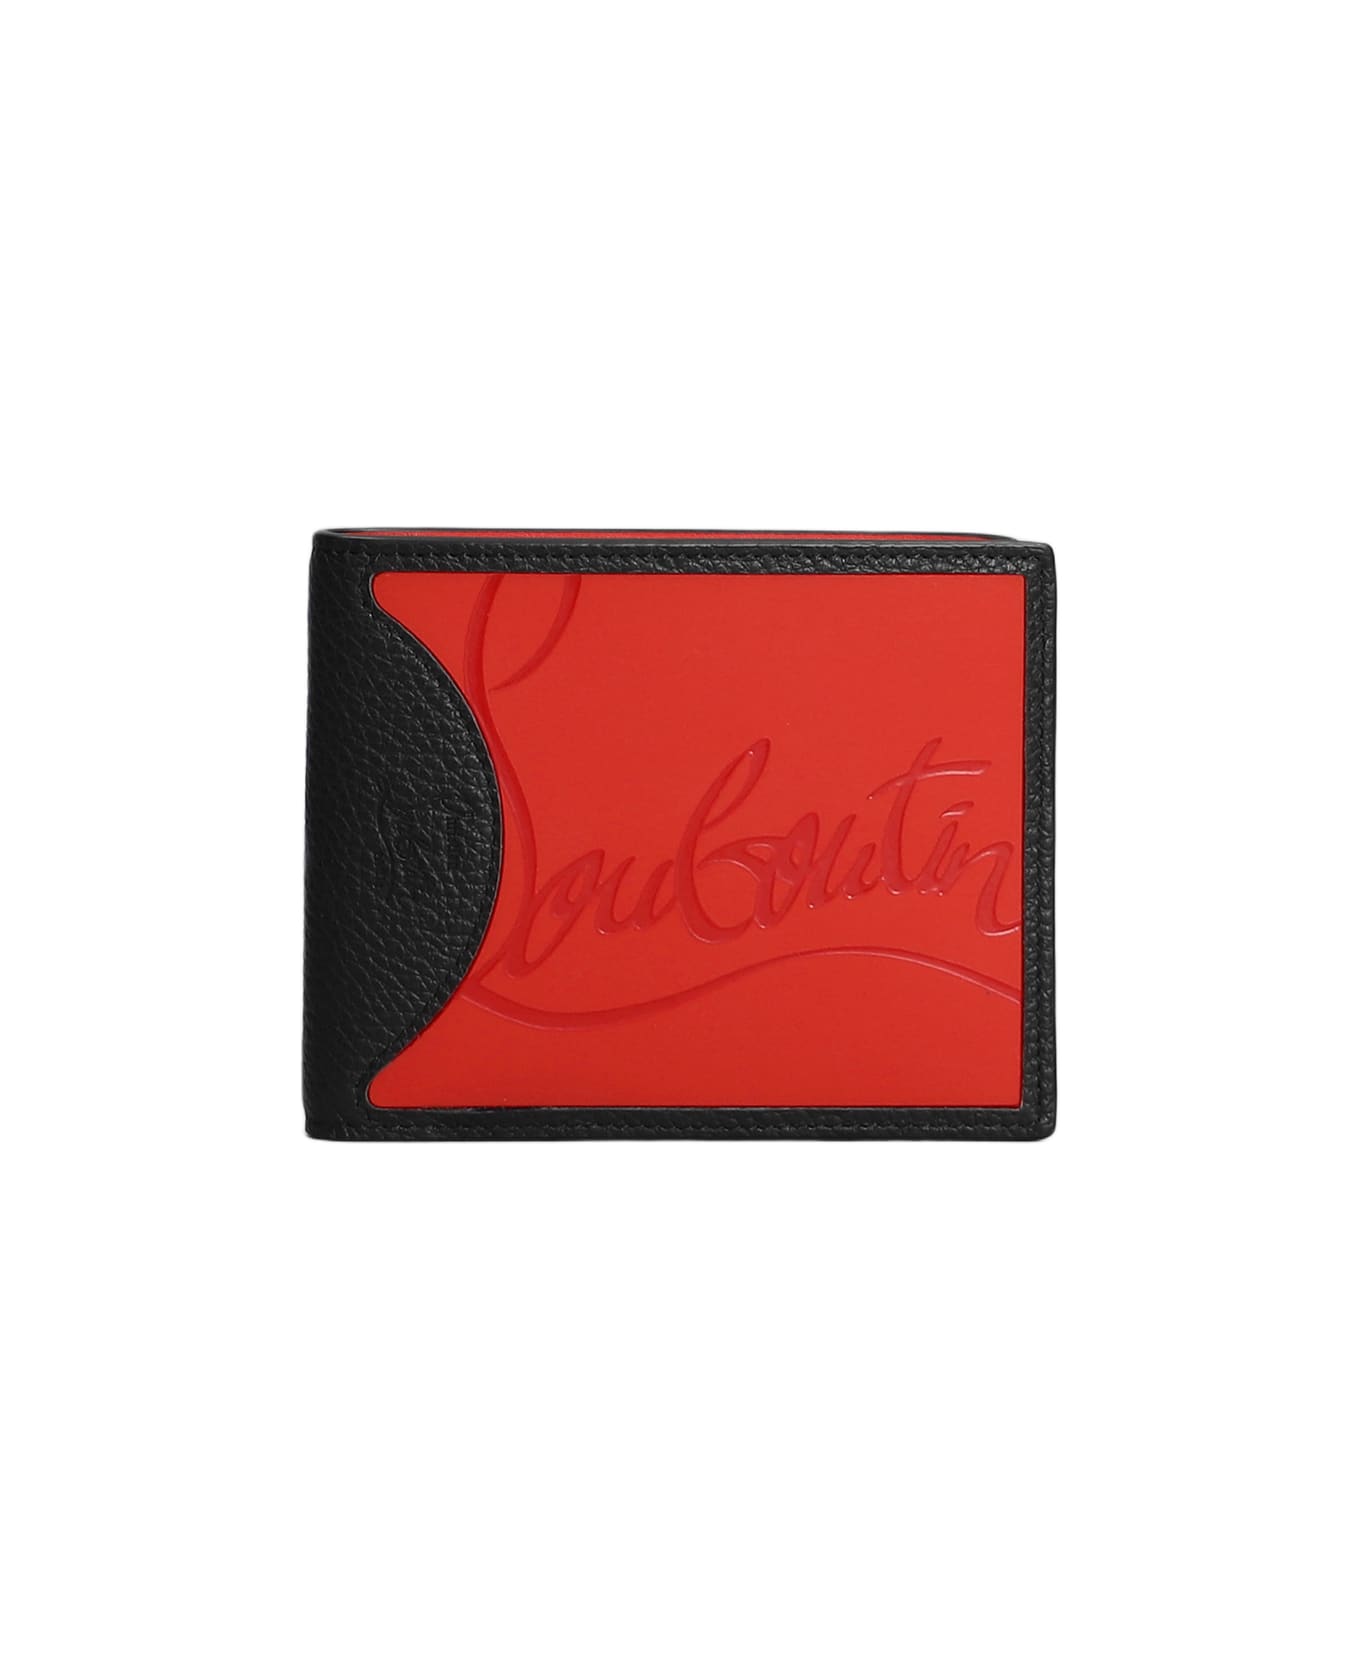 Christian Louboutin Coolcard Wallet In Black Leather - Black